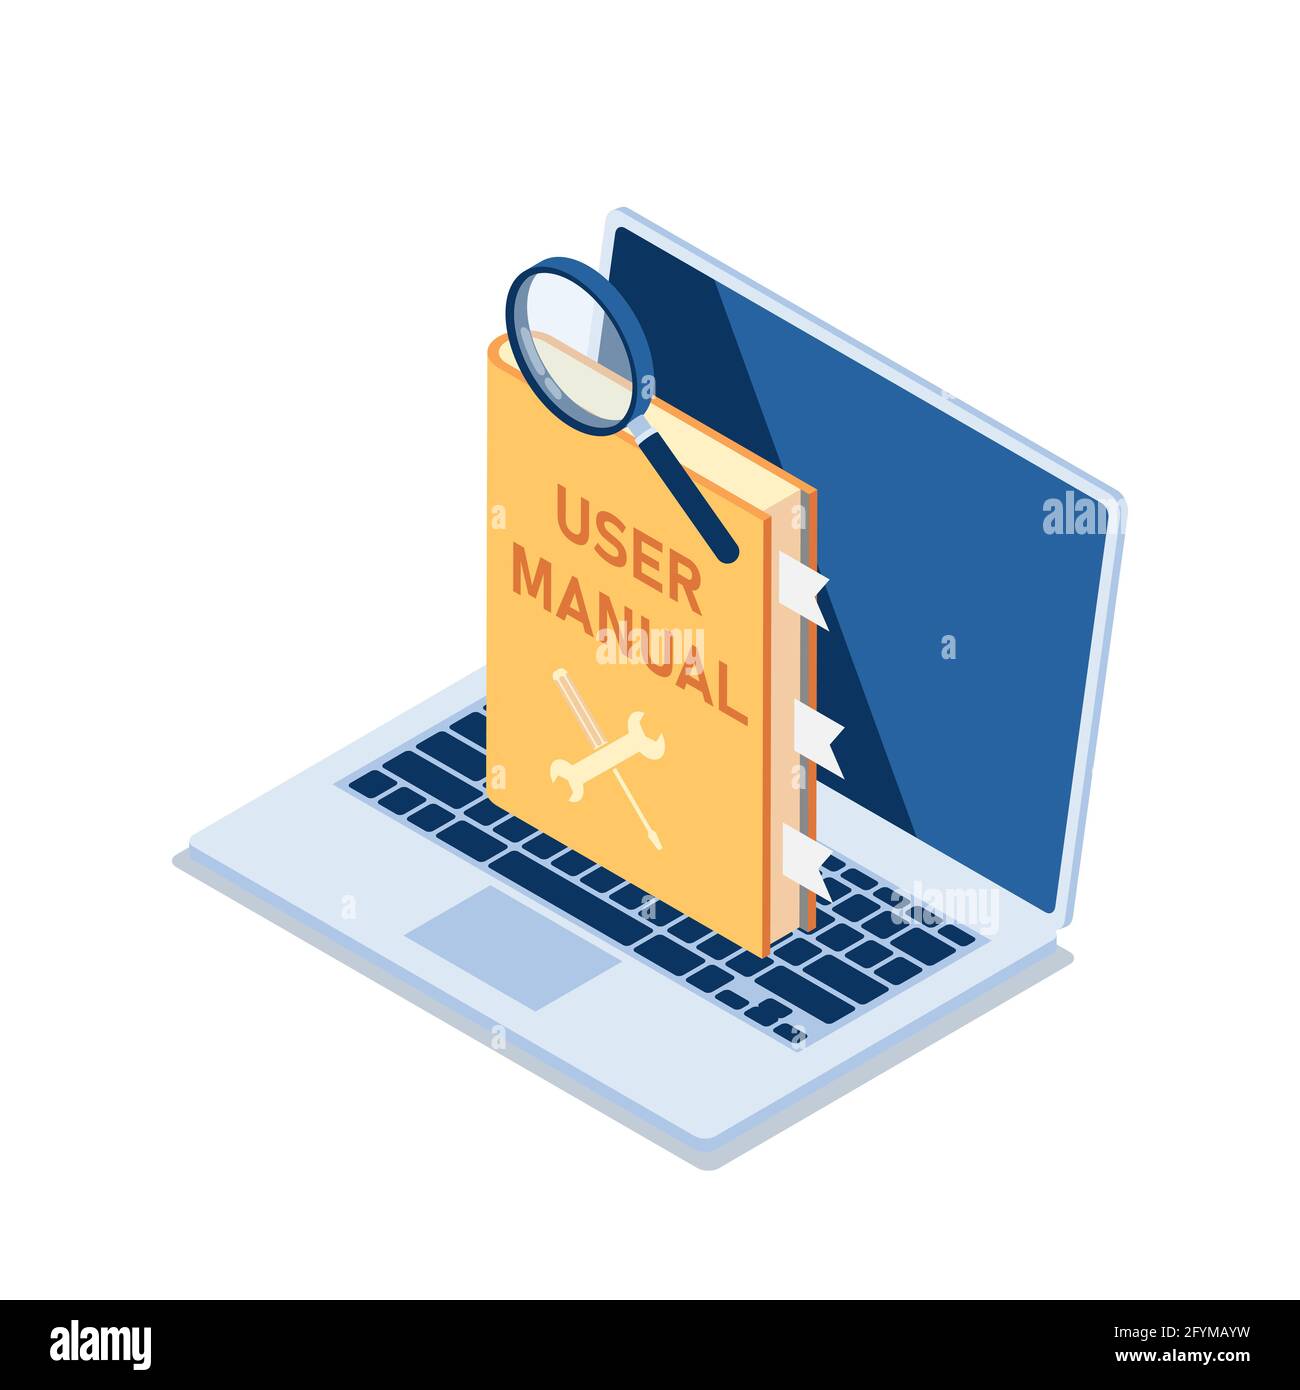 Flat 3d Isometric User Manual with Magnifying Glass on Laptop Monitor. User Manual Guide Concept. Stock Vector